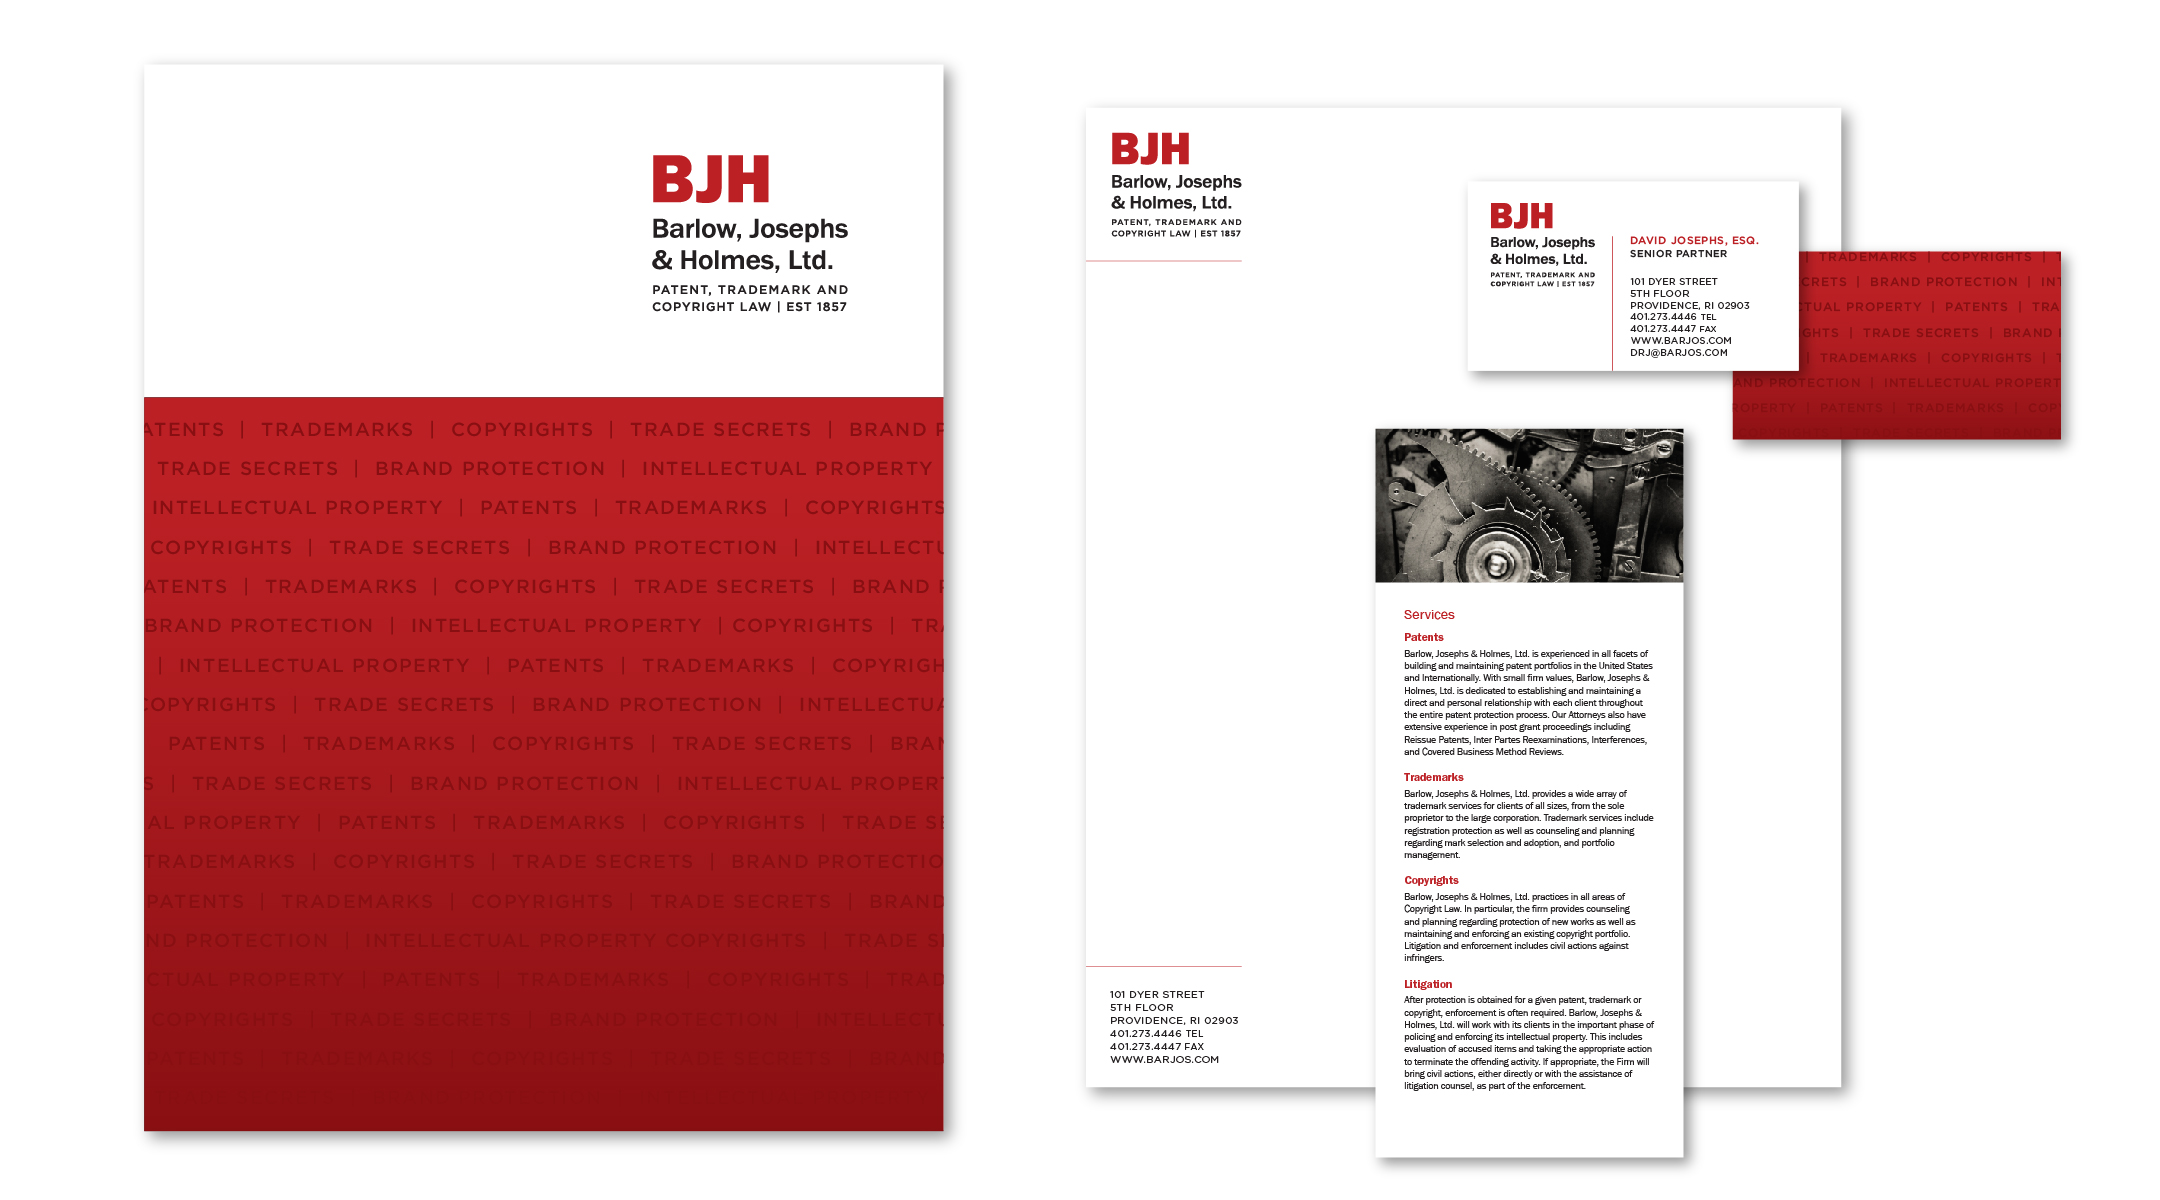 Branding and collateral materials for Barlow, Josephs & Holmes, a patent and intellectual property law firm.